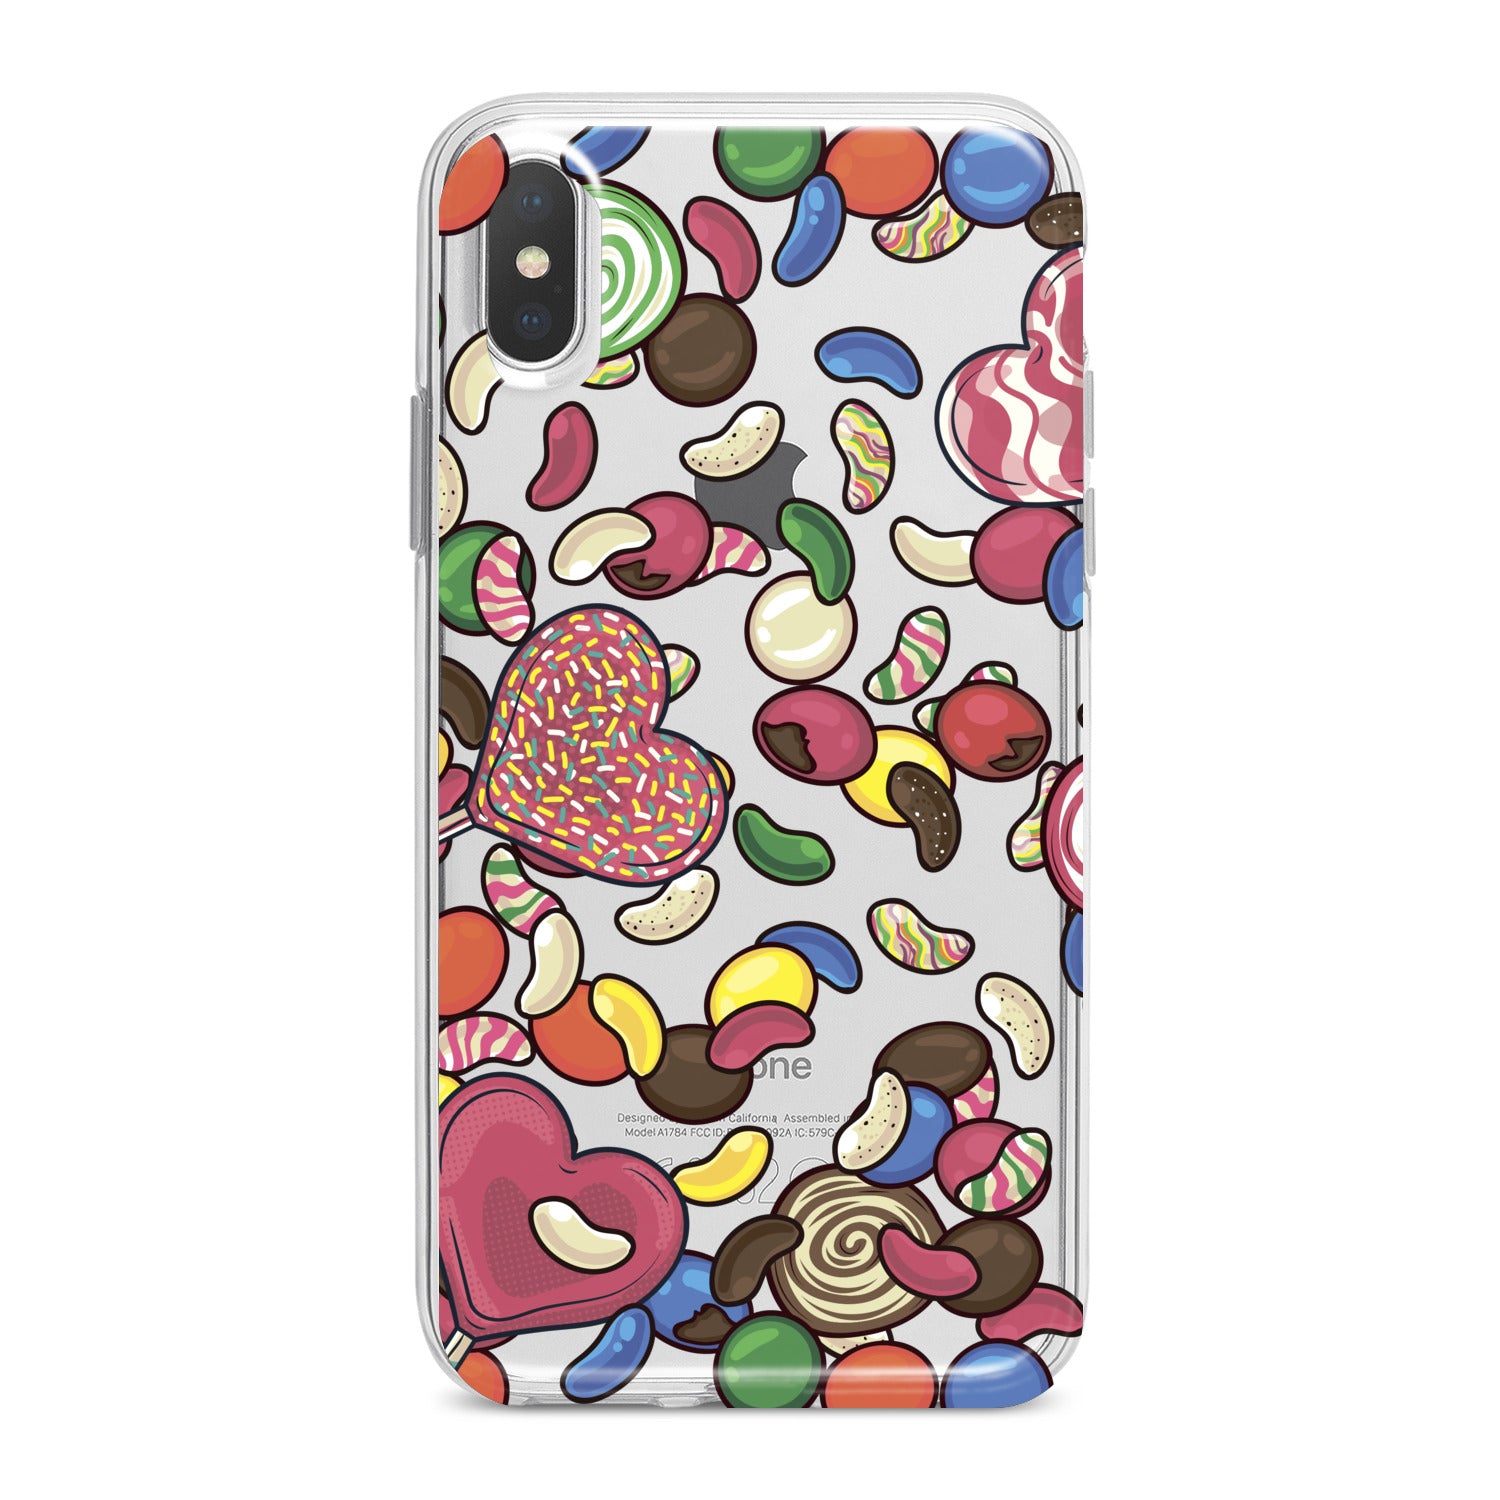 Lex Altern Colorful Candies Phone Case for your iPhone & Android phone.